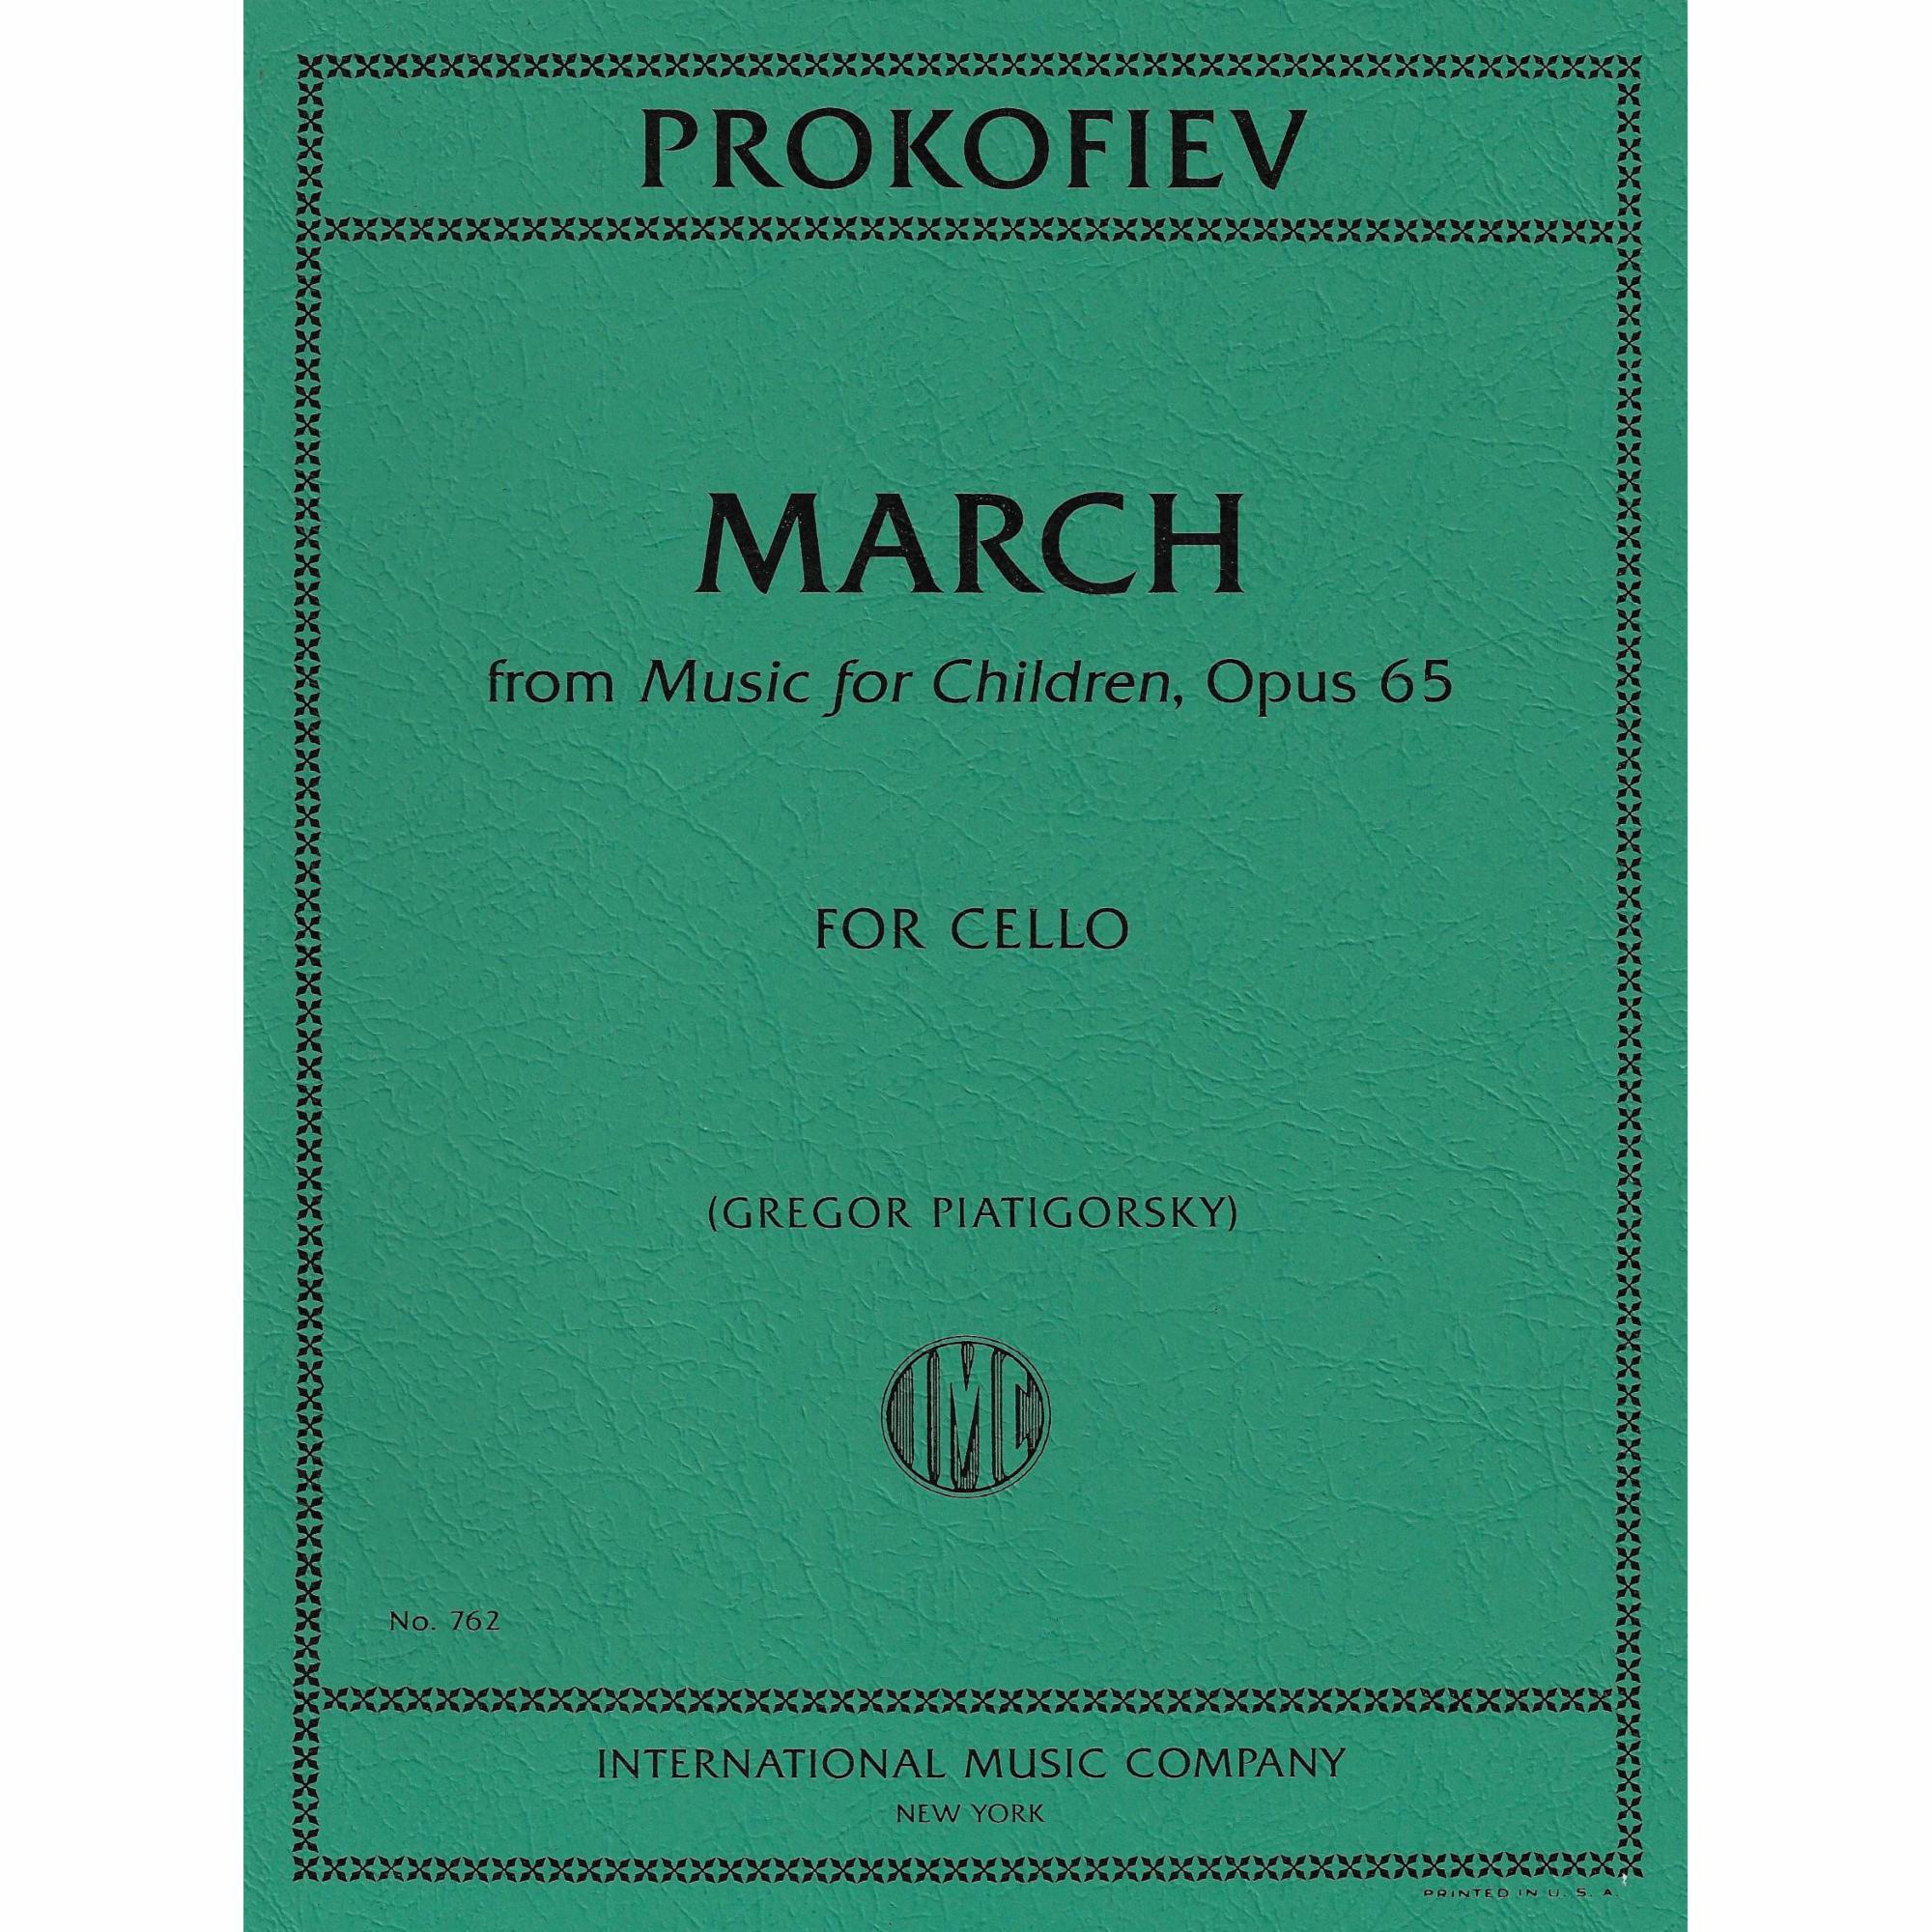 Prokofiev -- March, from Music for Children, Op. 65 for Solo Cello